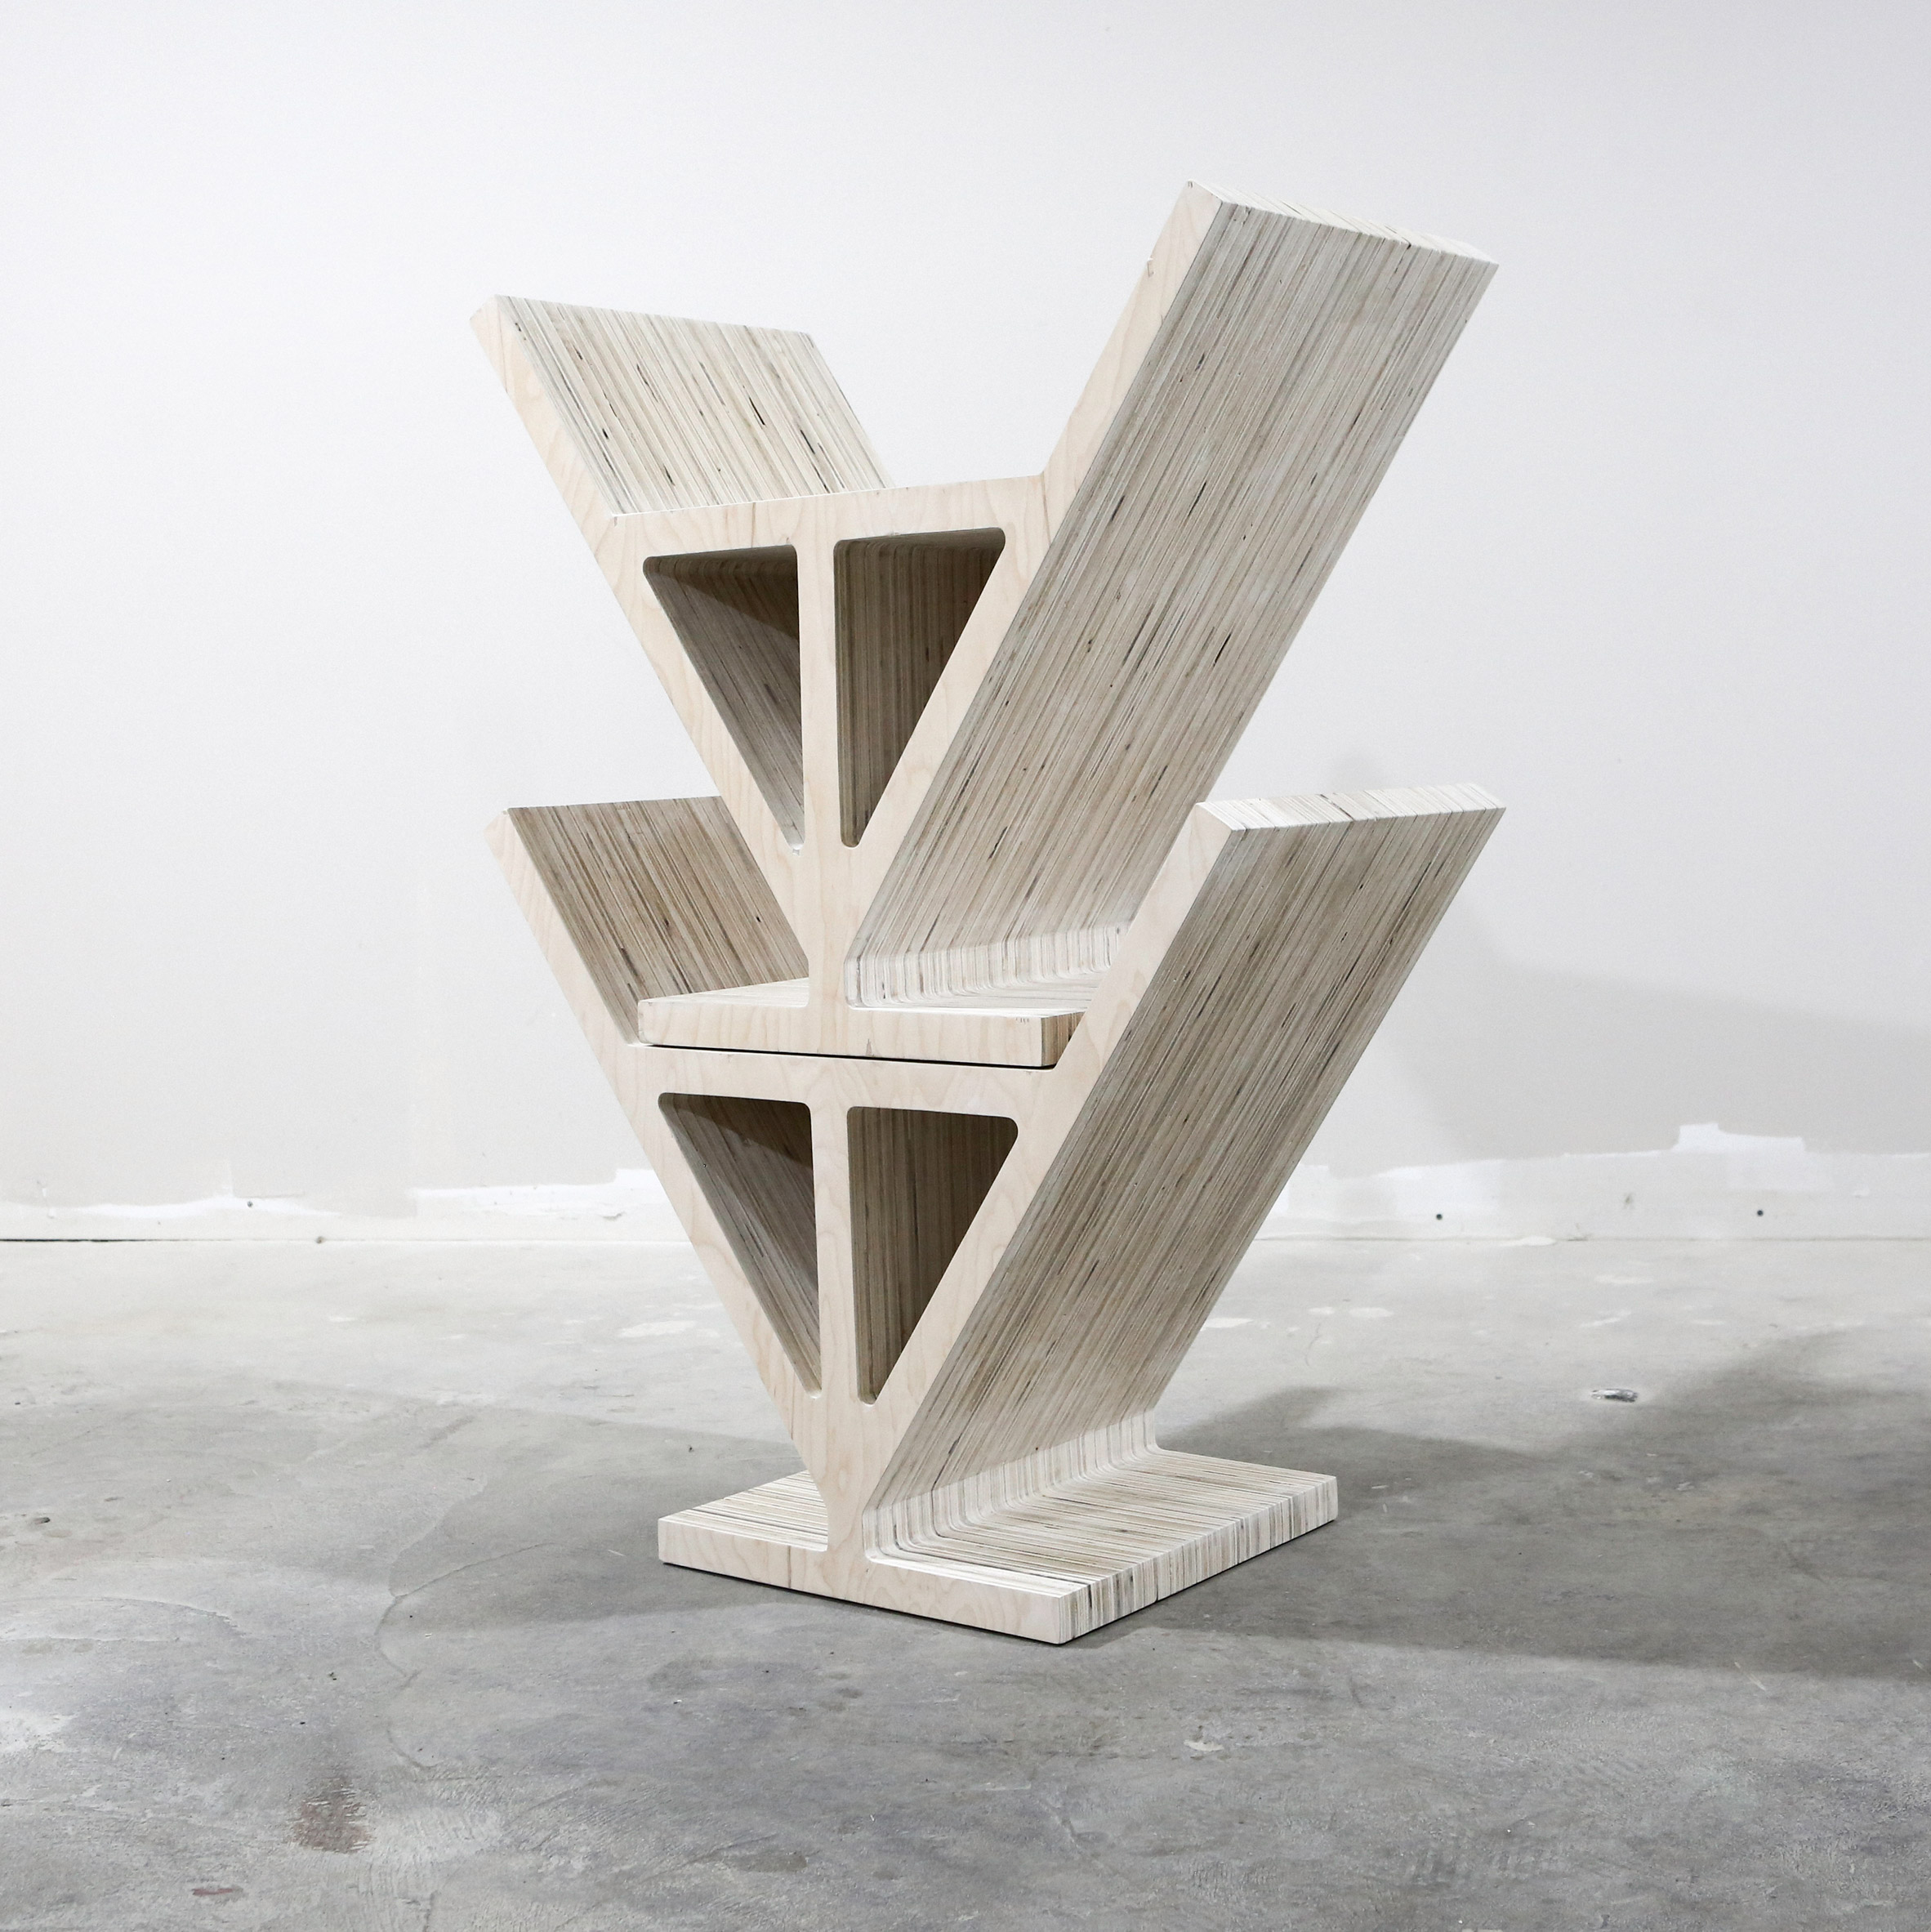 Euclid Stool by Limbo Accra, referencing West African symbolism